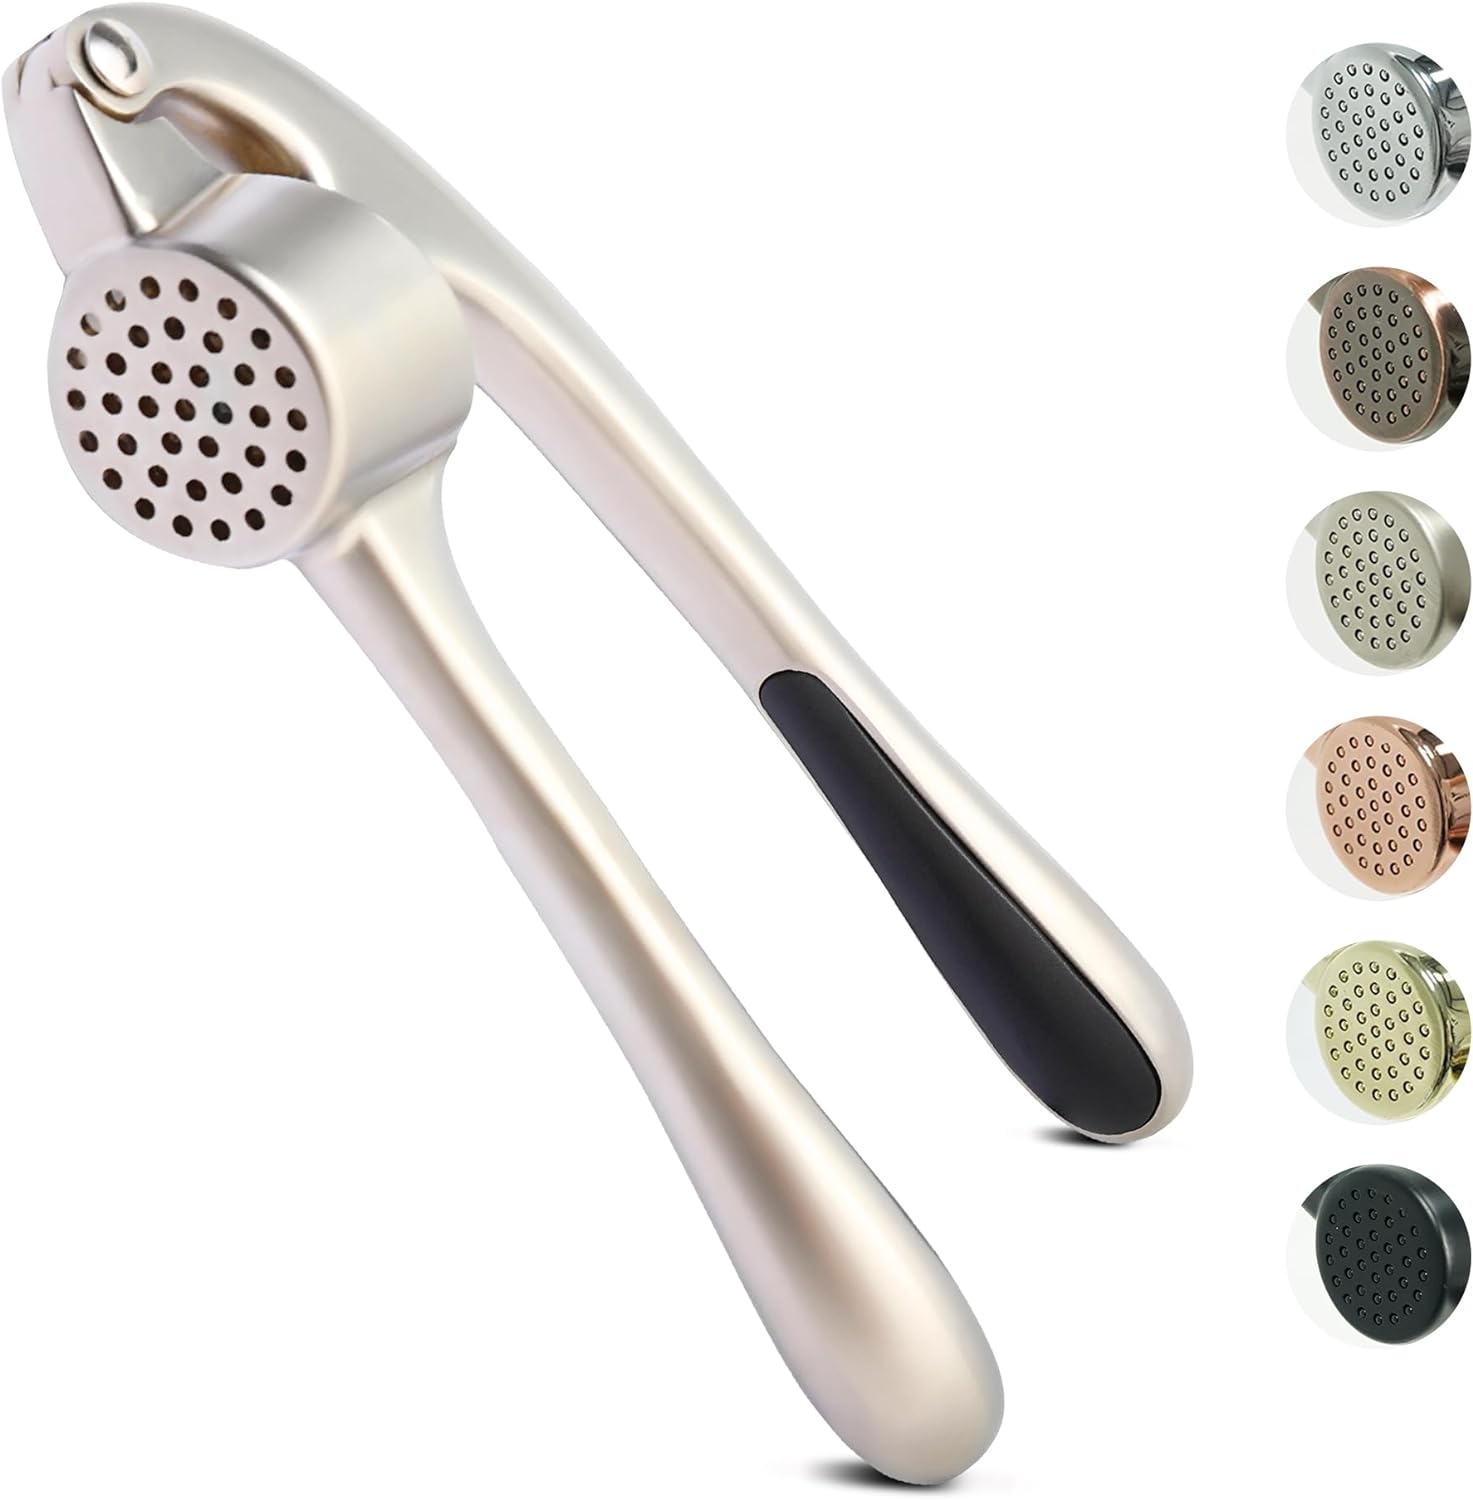 Pampered Chef Garlic Press #2575 NO CLEANING TOOL